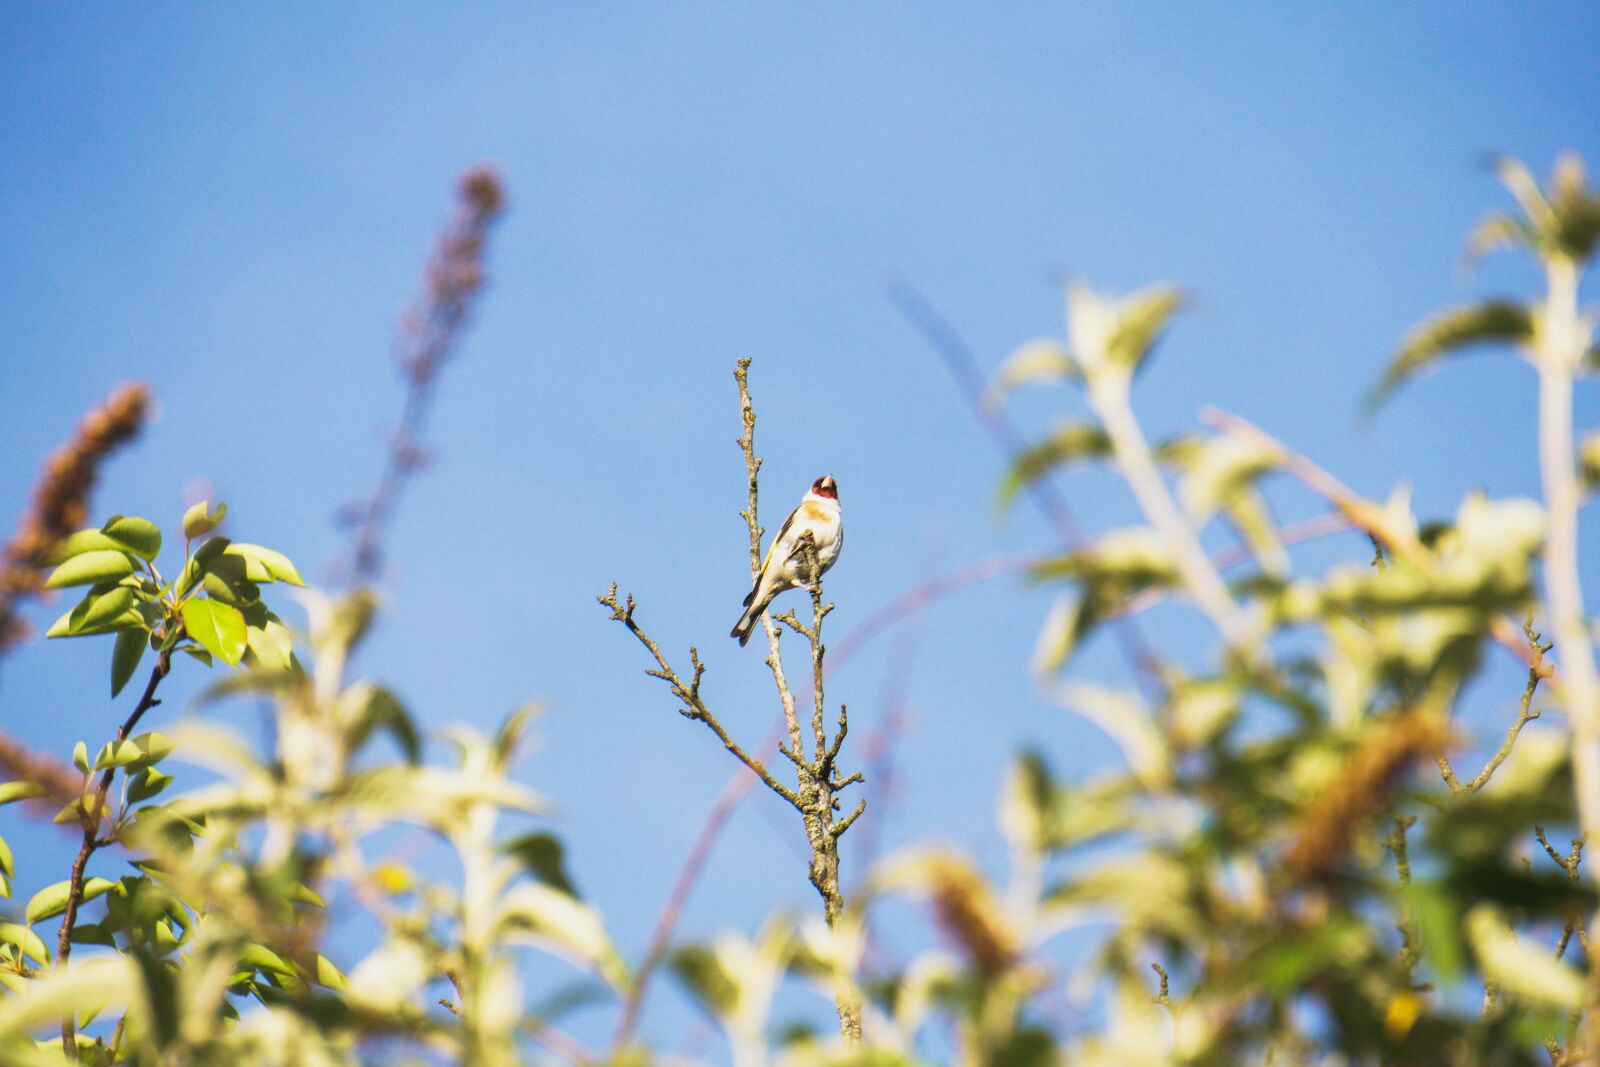 Sony a6300 sample photo. Goldfinch, bird, nature photography